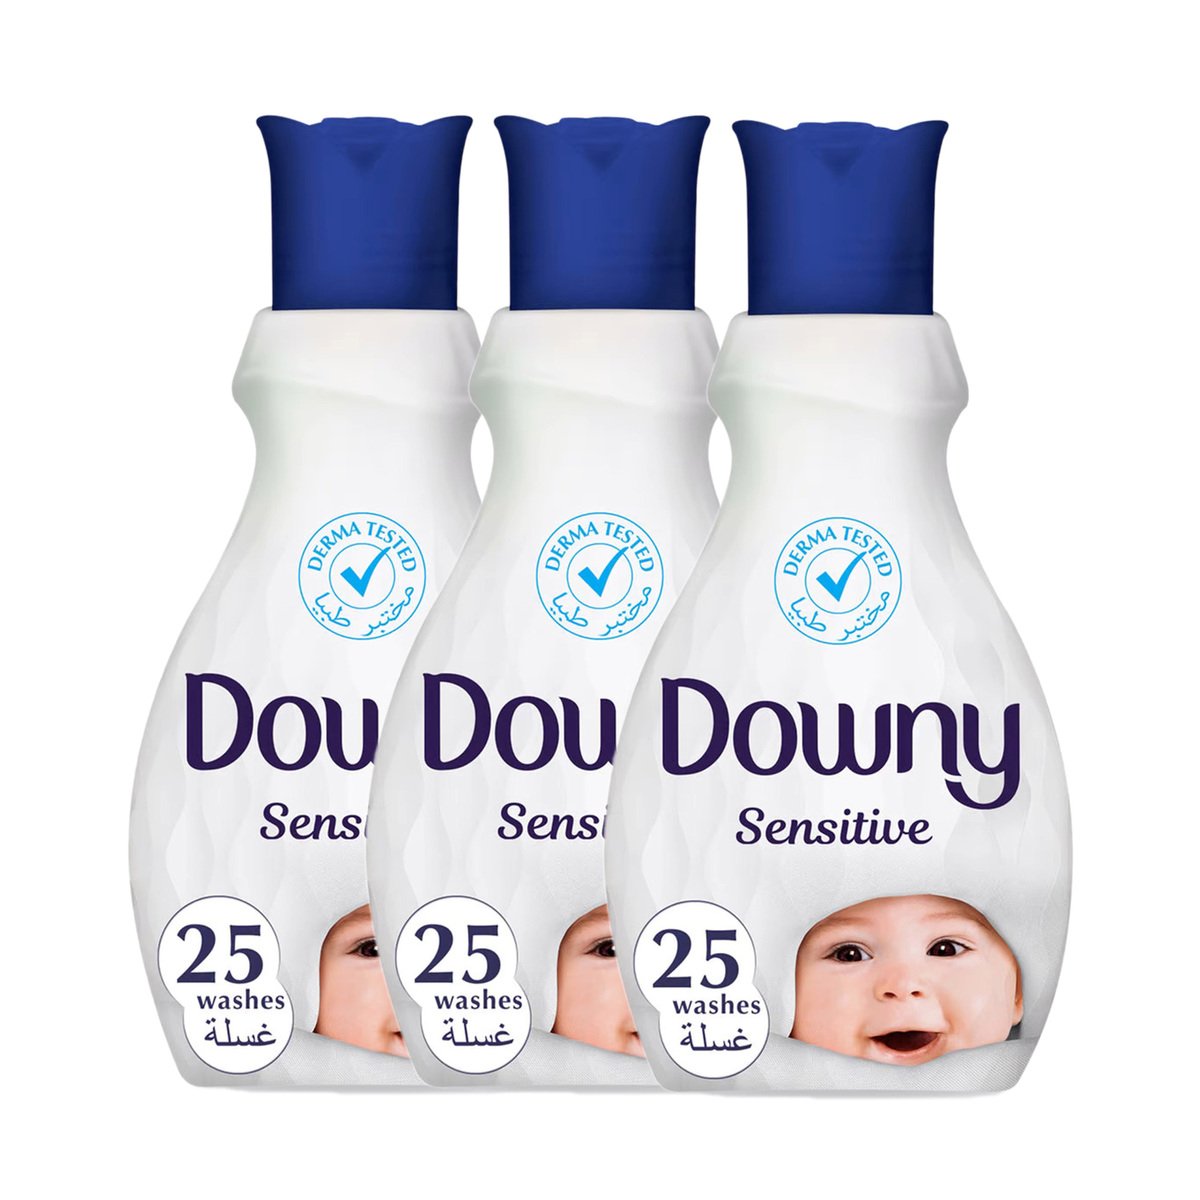 Downy Sensitive Concentrate Fabric Softener Value Pack 3 x 1.5Litre